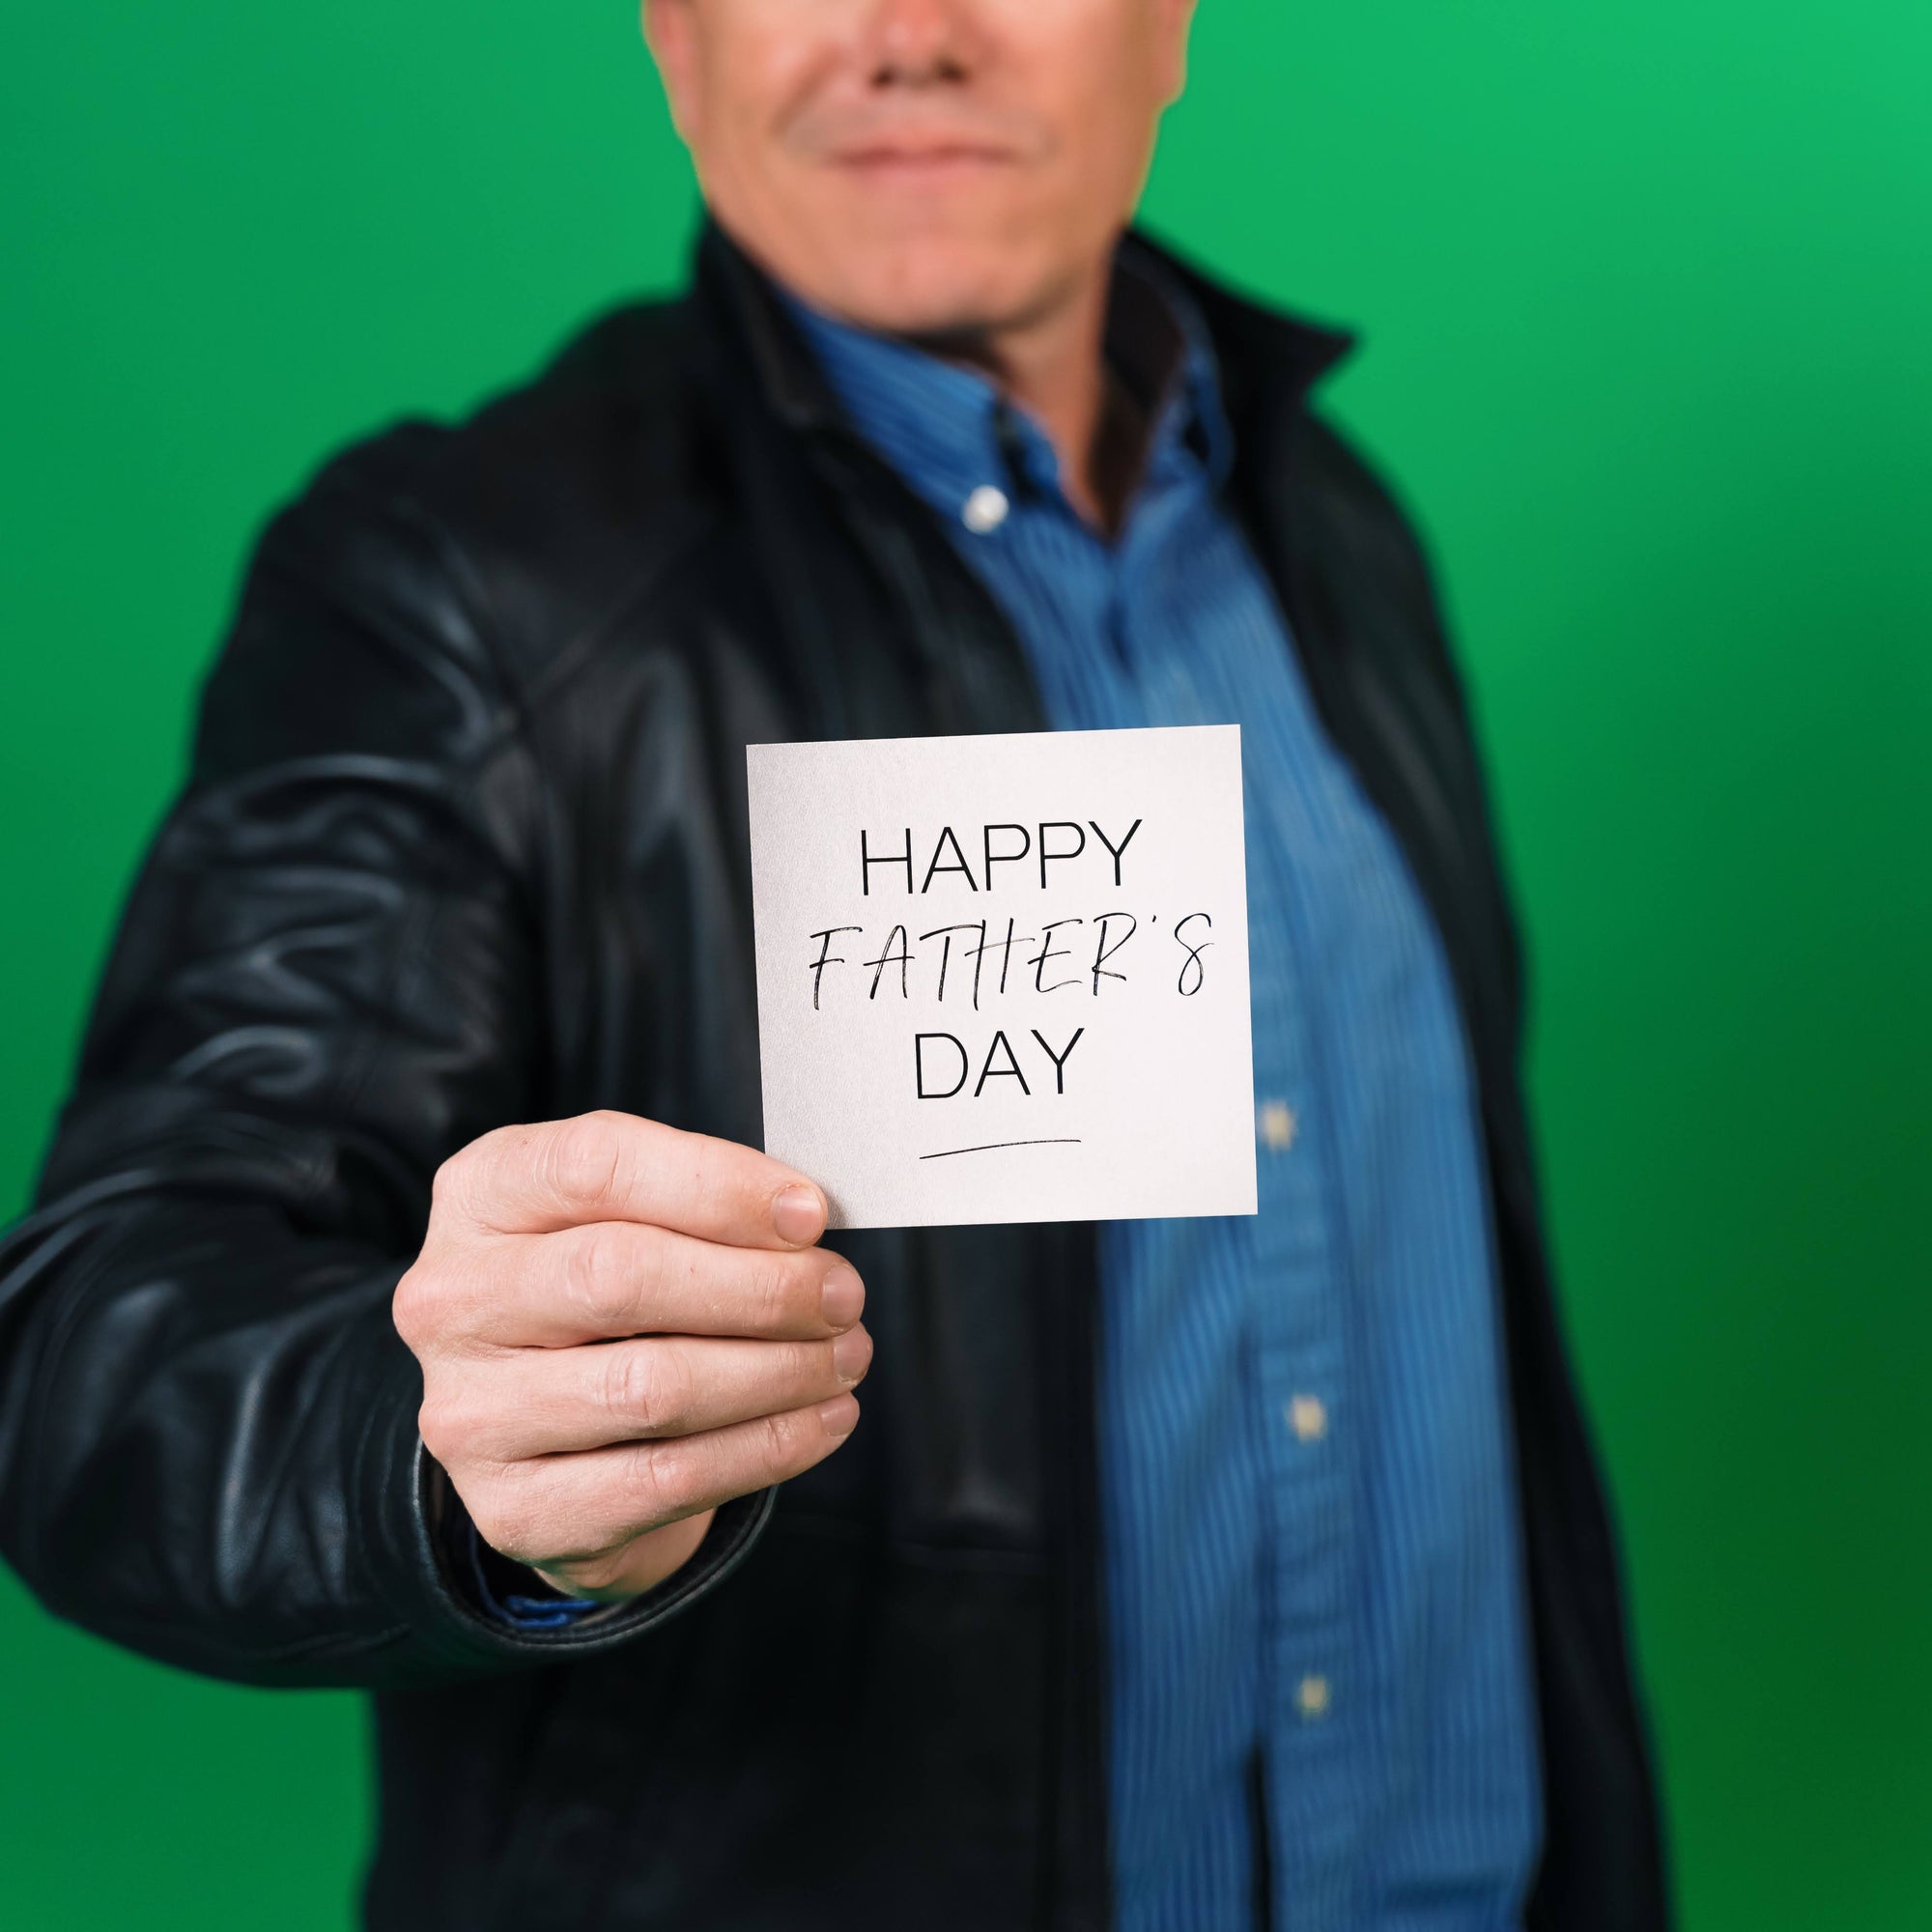 Dad holding note saying "Happy Father's Day" for Brightbox blog on Gifts for Him